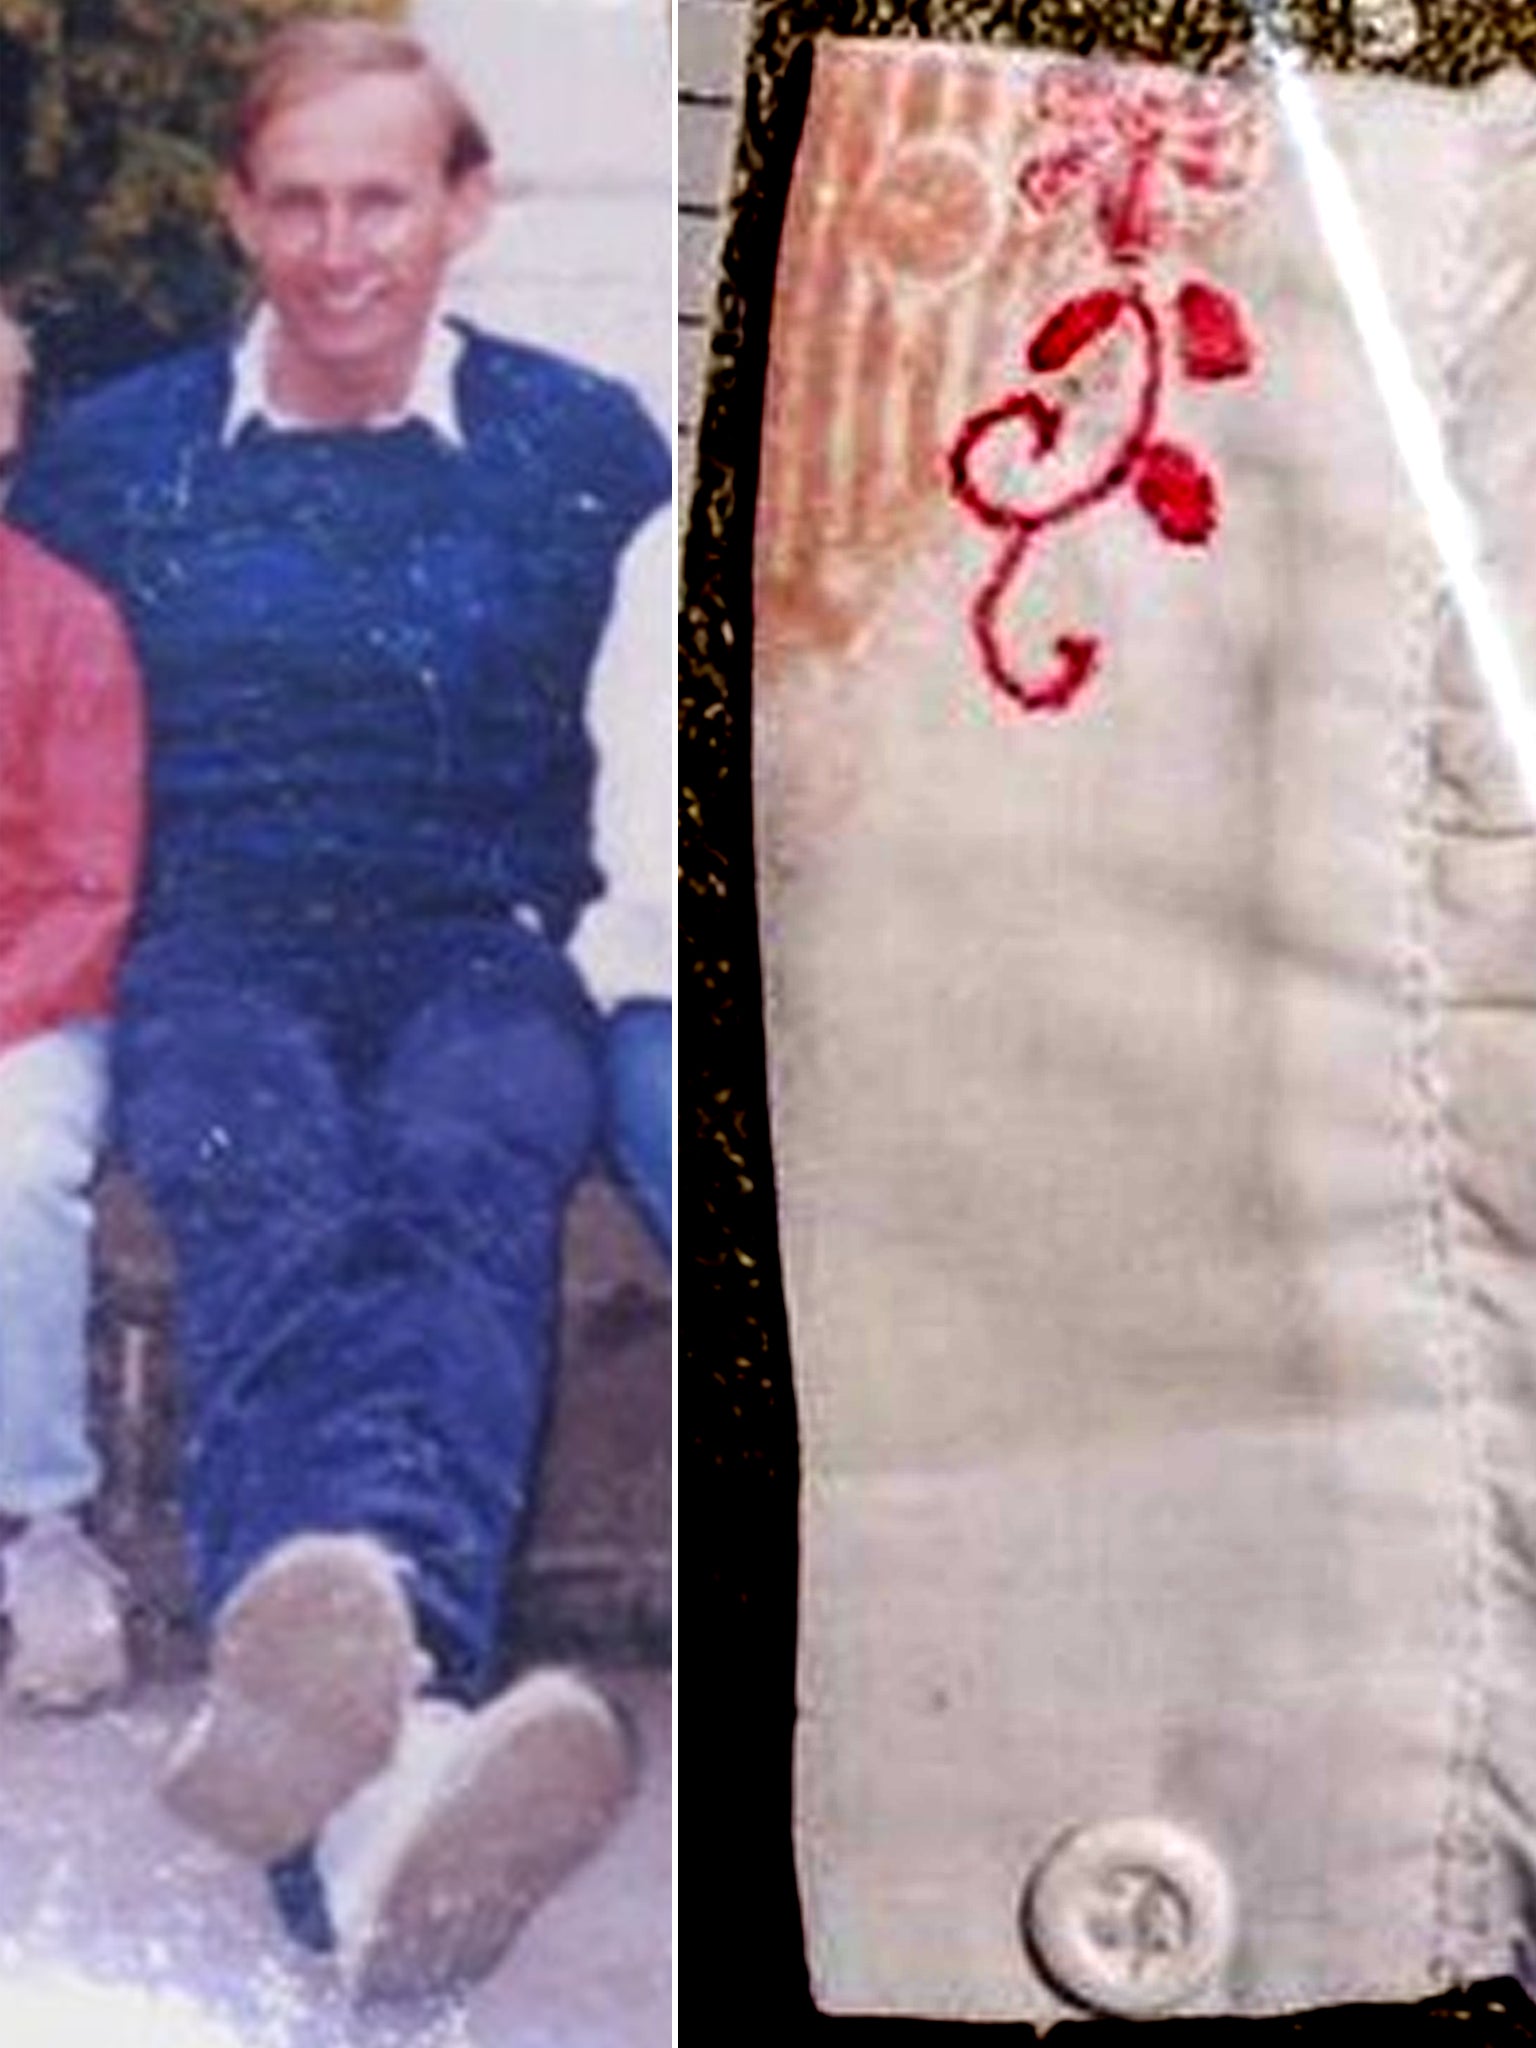 Photo of Fuller, left, wearing trainers that matched shoeprint left on Knell’s blouse